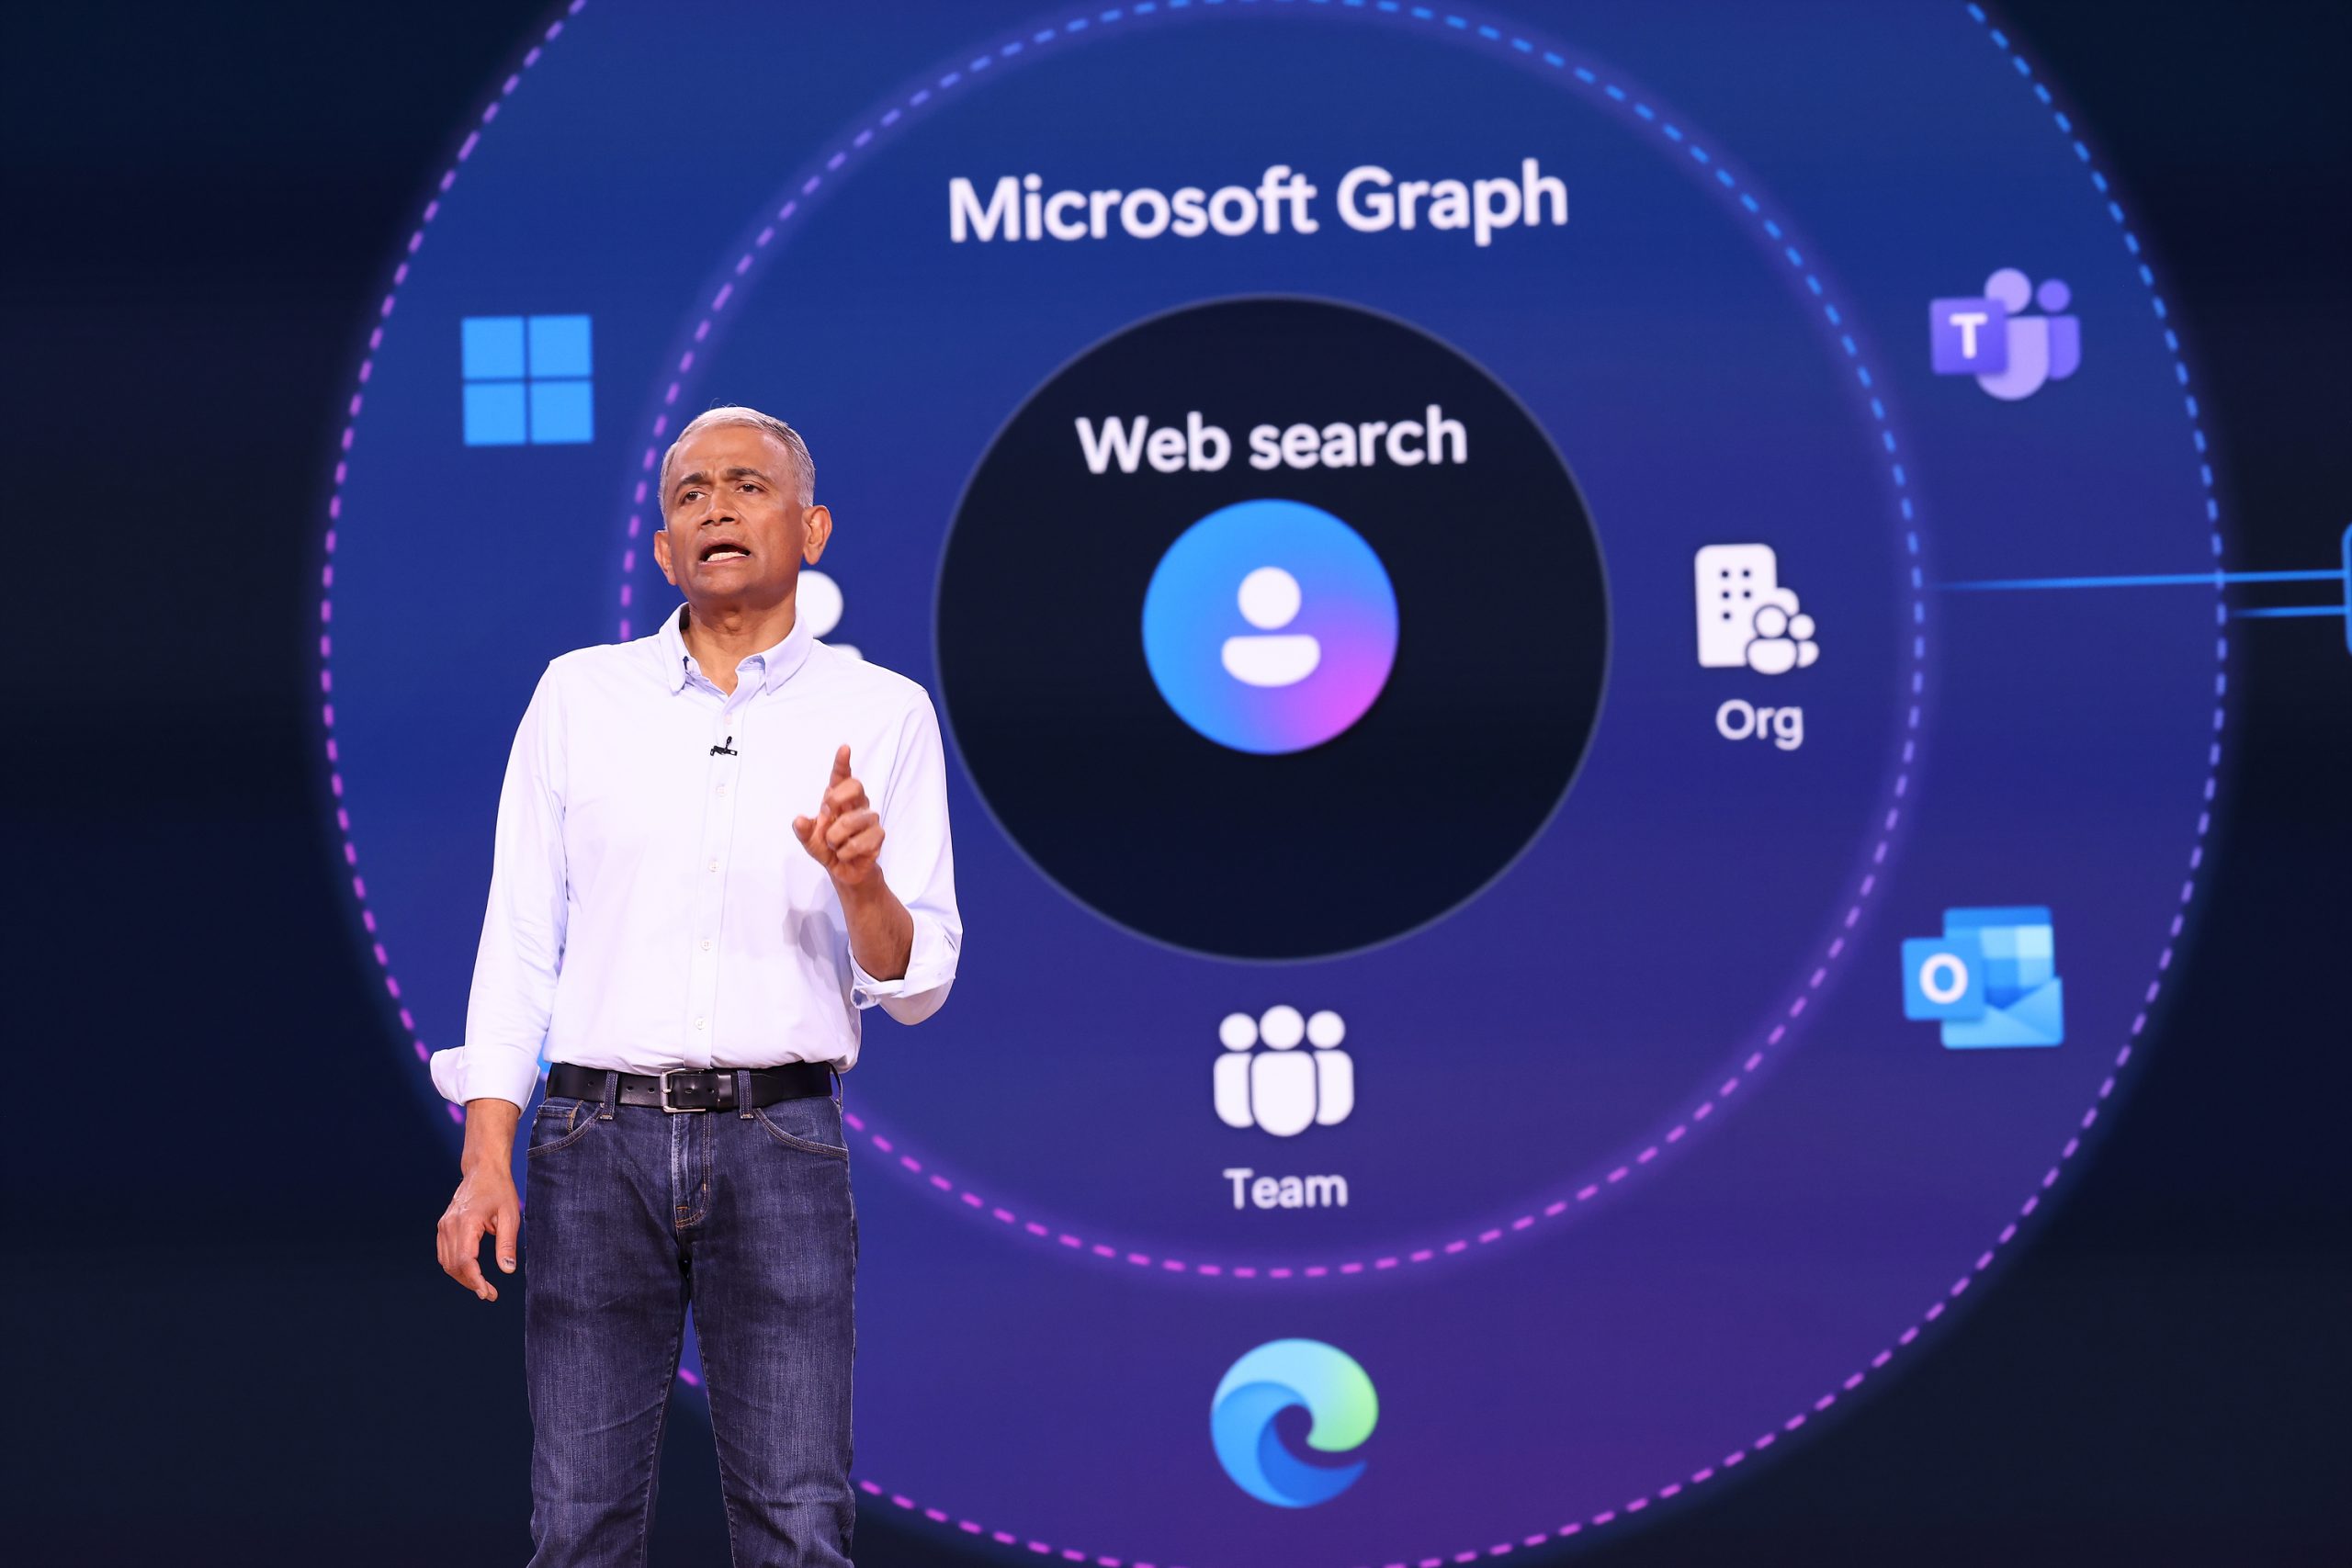 A man standing on stage with a Microsoft Graph illustration on a screen behind him